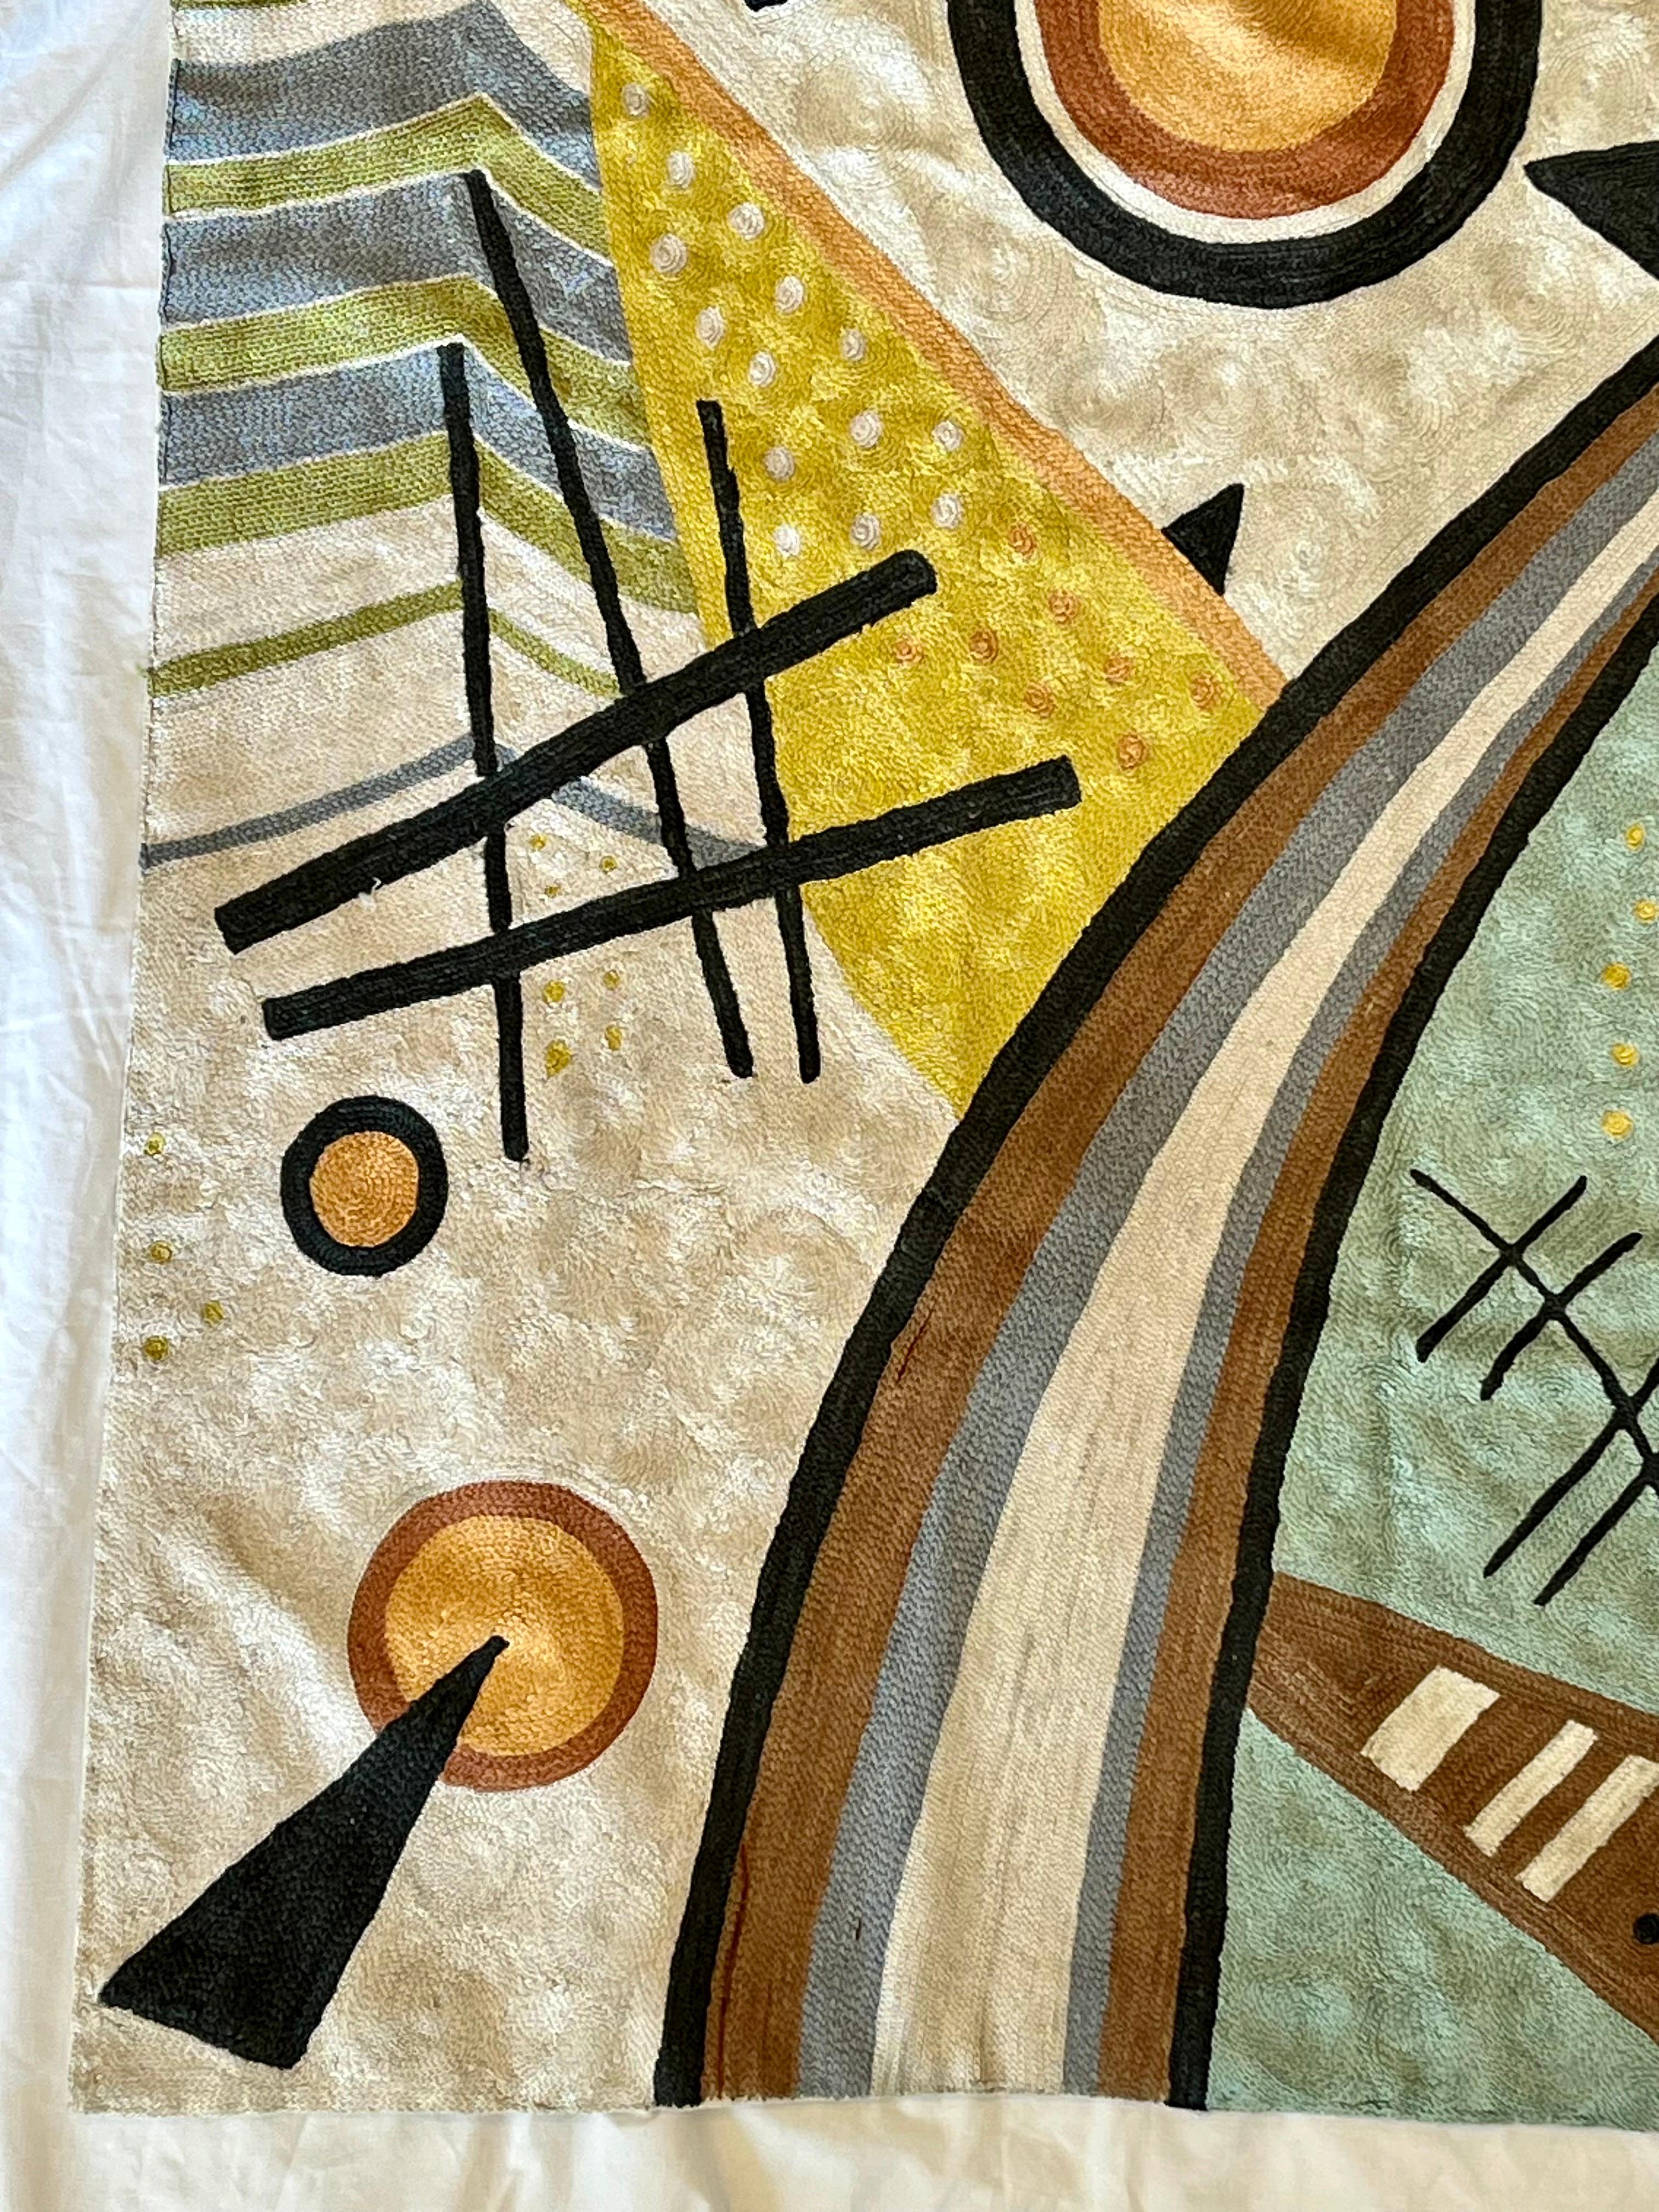 Hand-Woven Wassily Kandinsky Style Silk Chain Stitch Embroidery Abstract Carpet Weaving